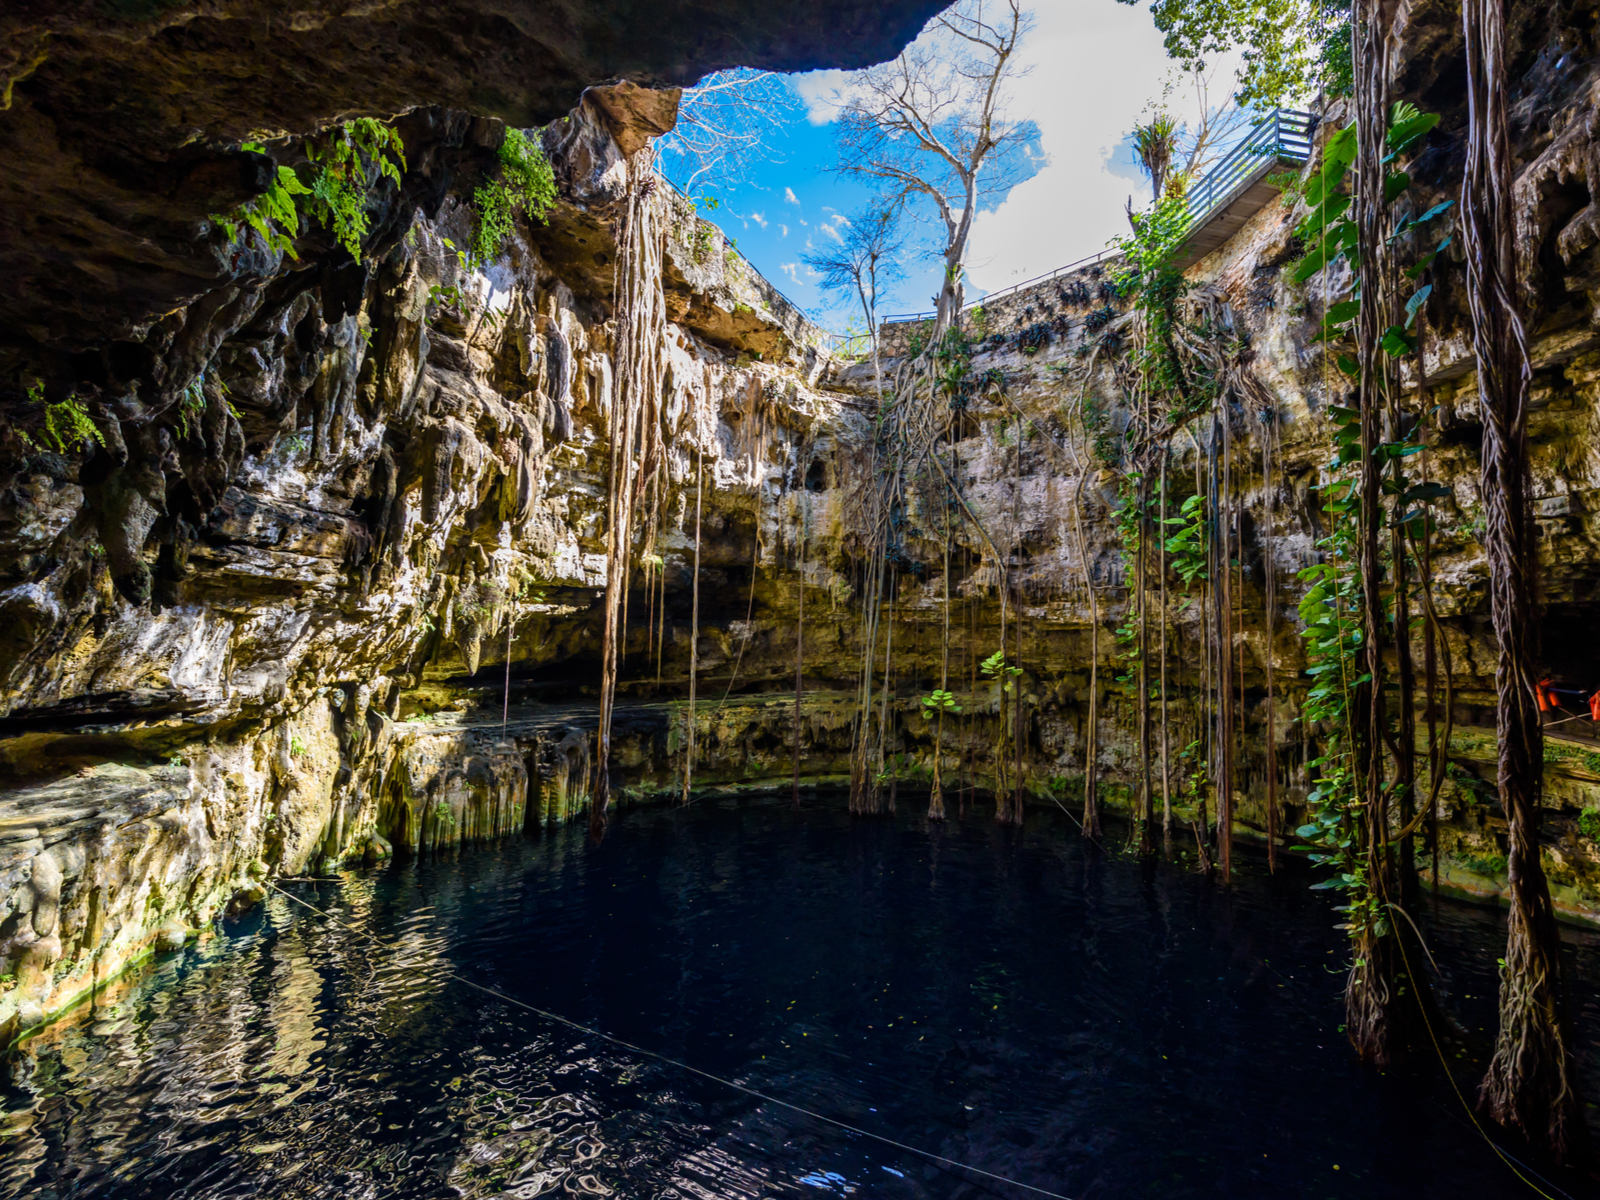 Cenote Oxman, one of the best cenotes in Mexico, as viewed from the stairs